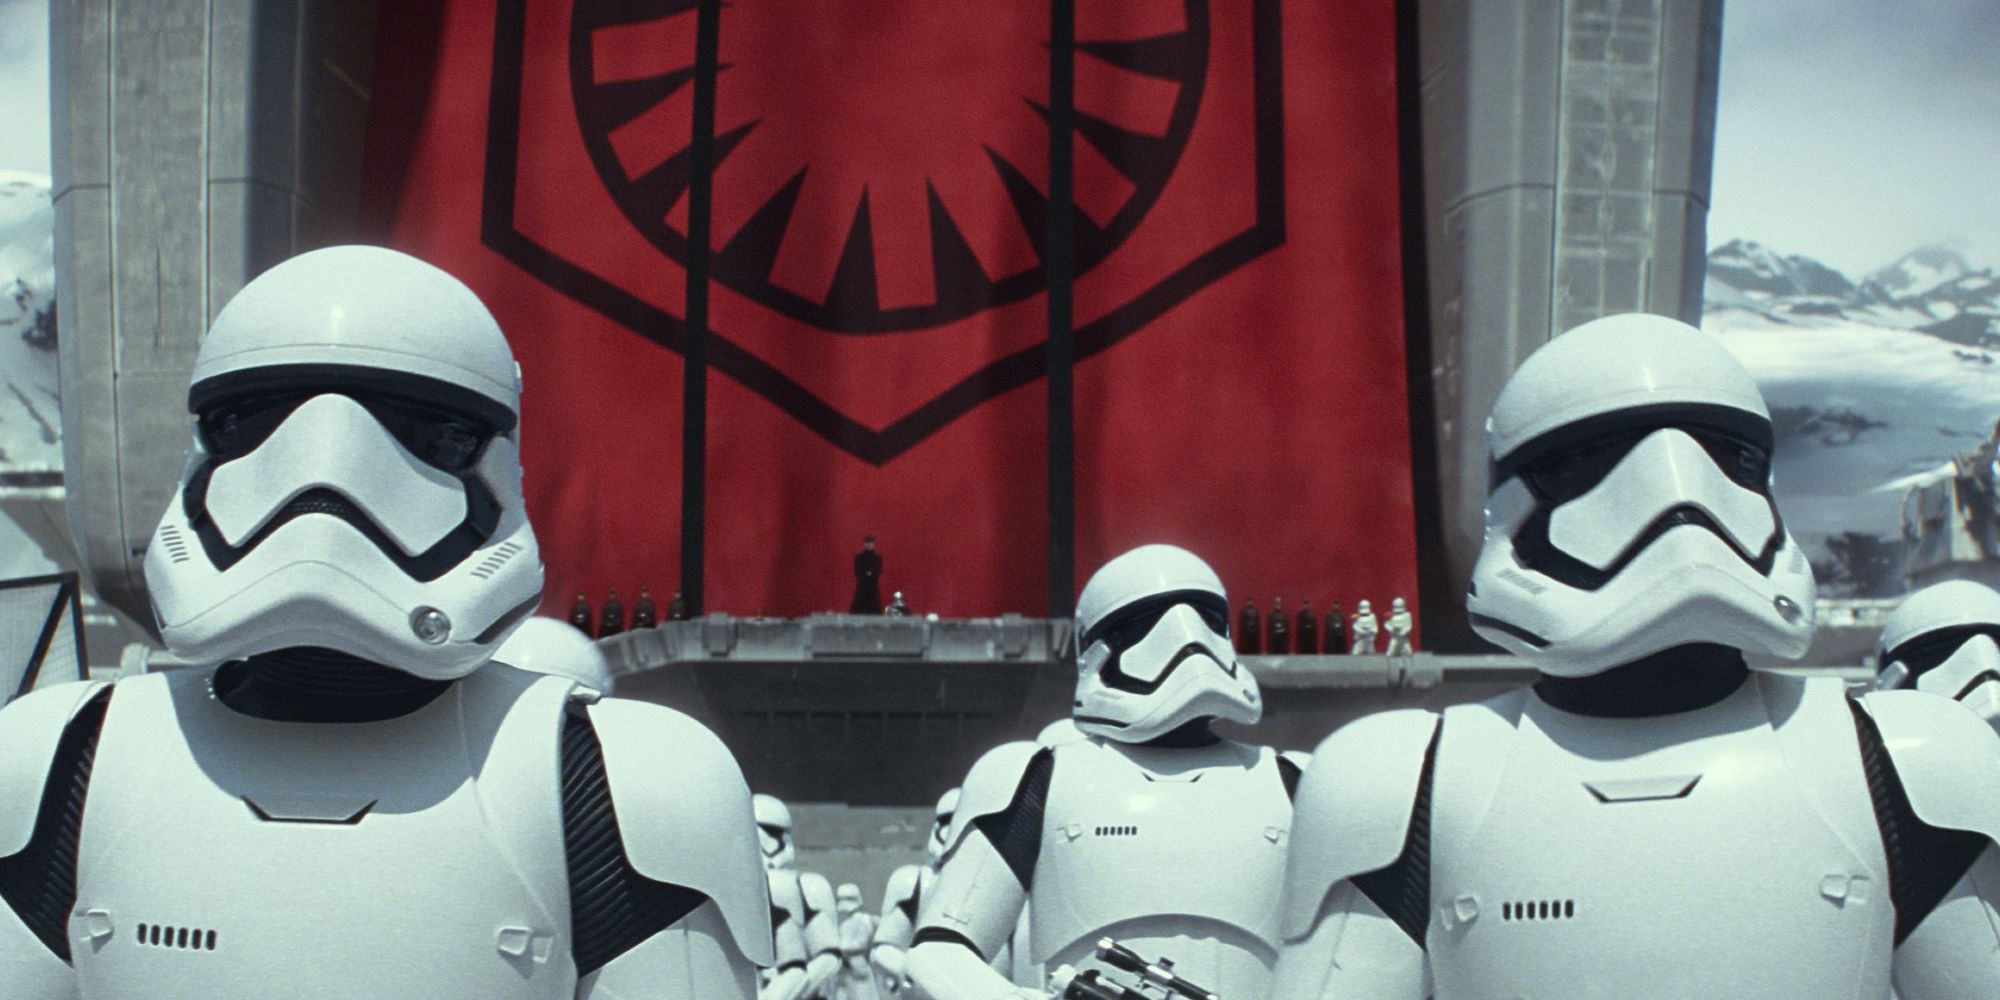 Star Wars first order stormtroopers